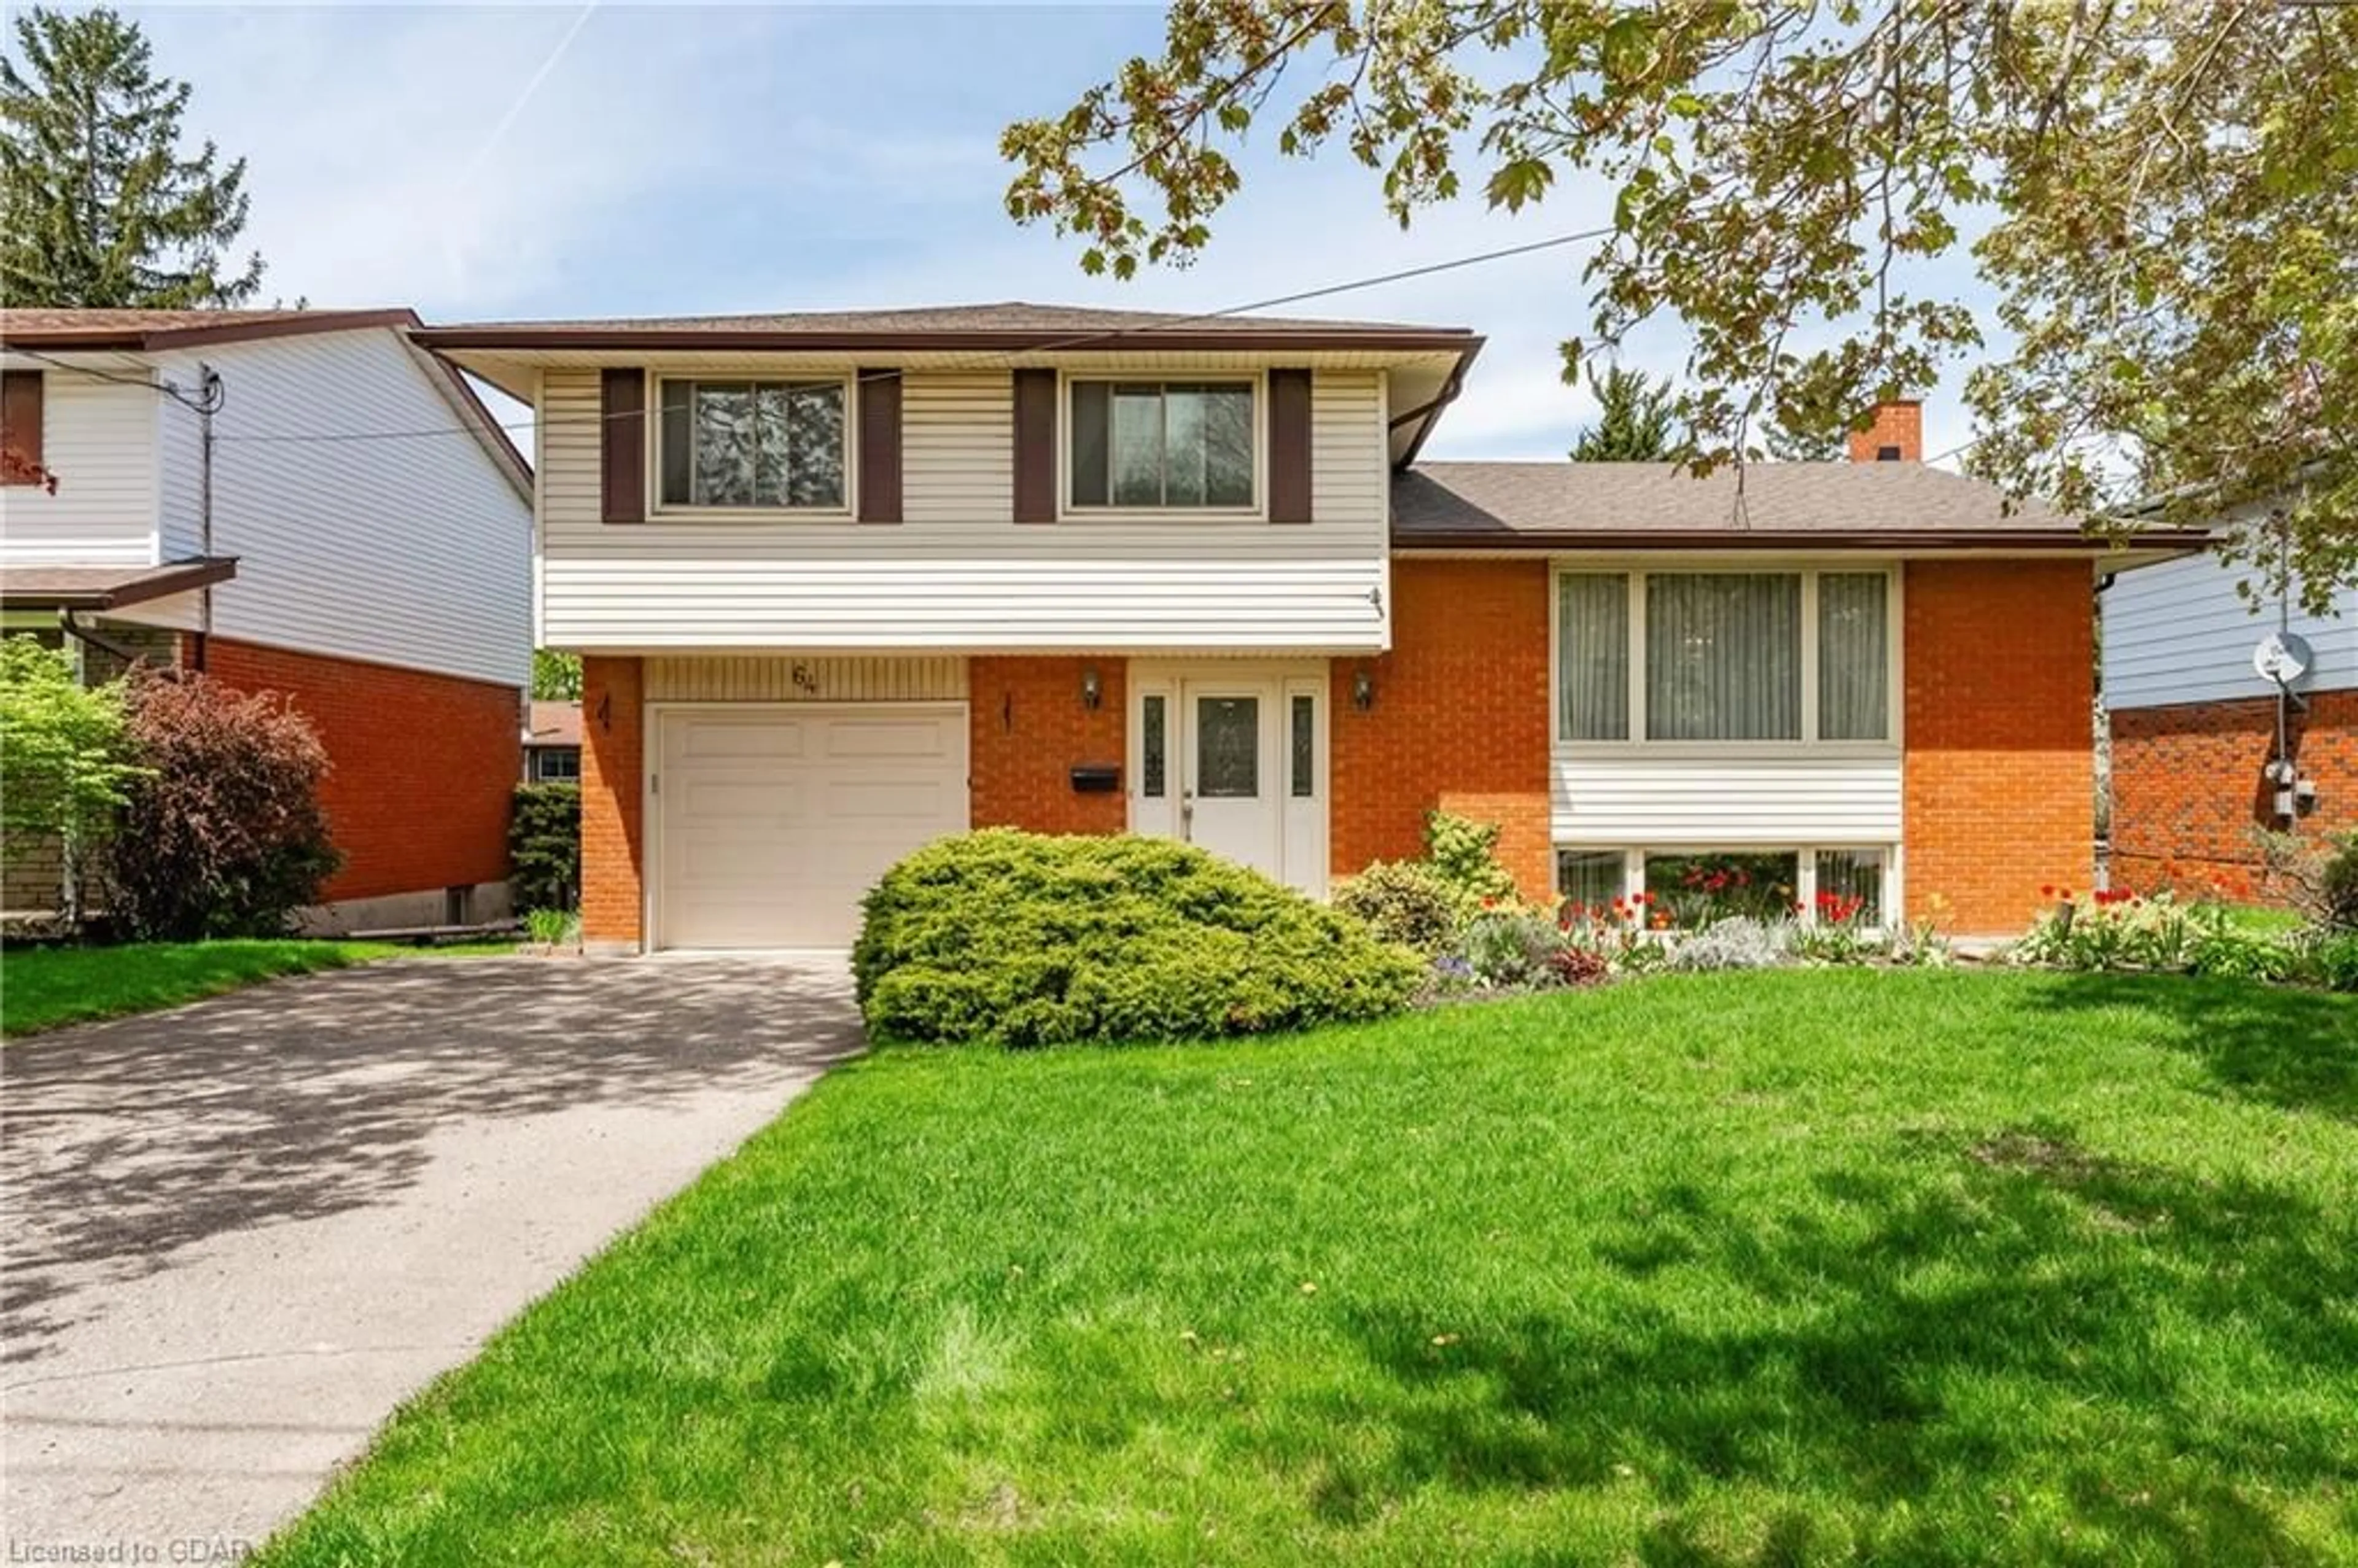 Home with brick exterior material for 64 Brentwood Dr, Guelph Ontario N1H 5M7